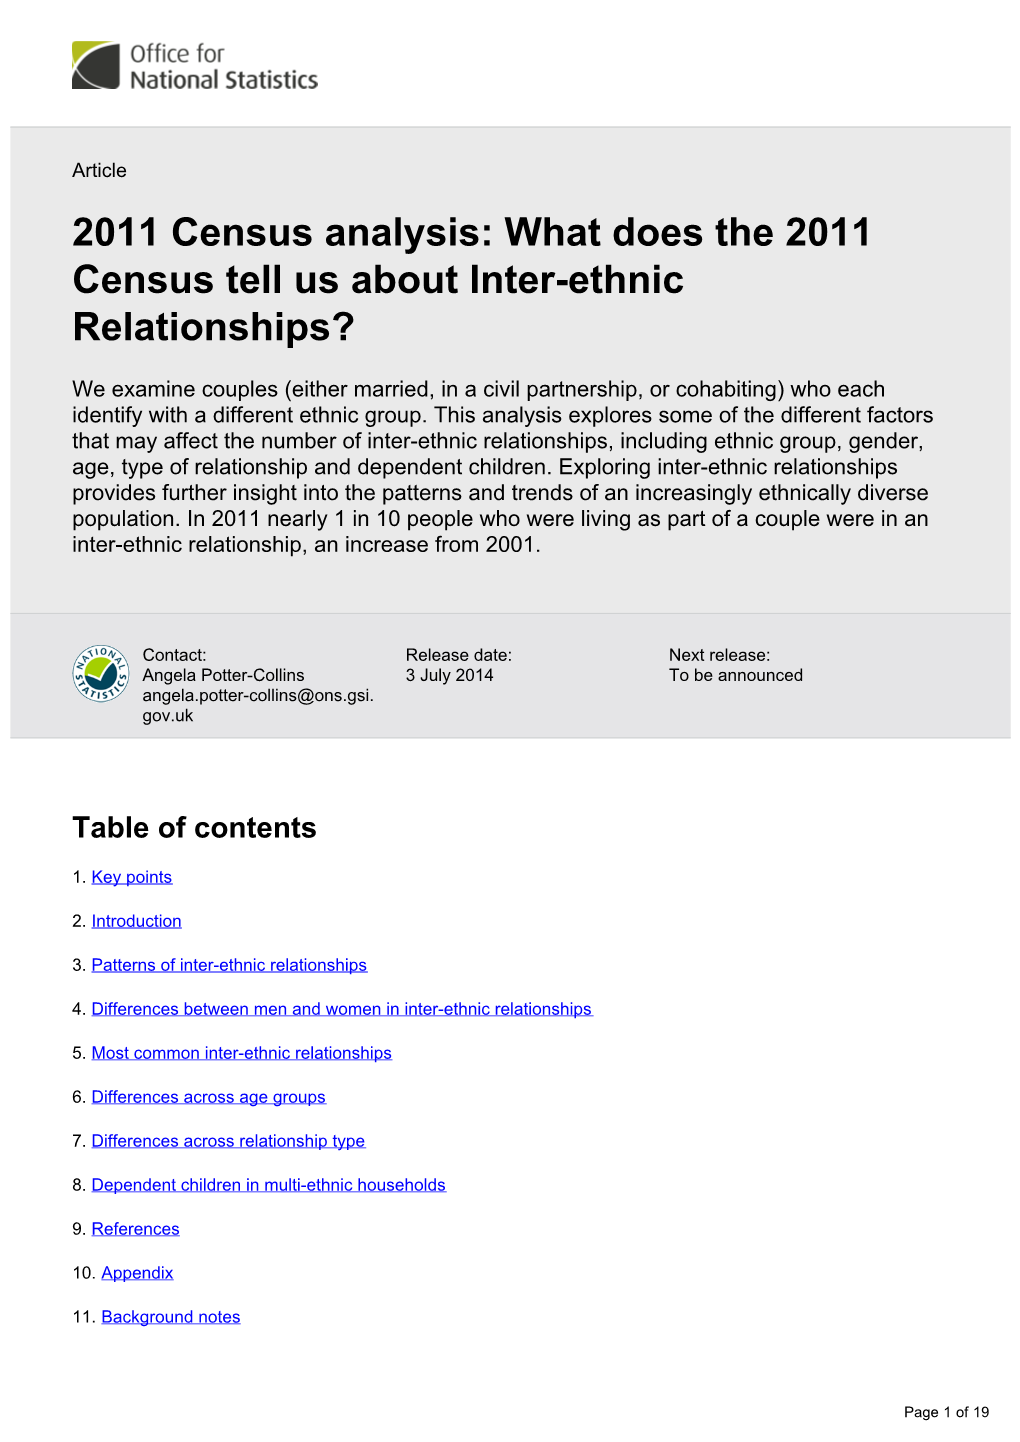 2011 Census Analysis: What Does the 2011 Census Tell Us About Inter-Ethnic Relationships?